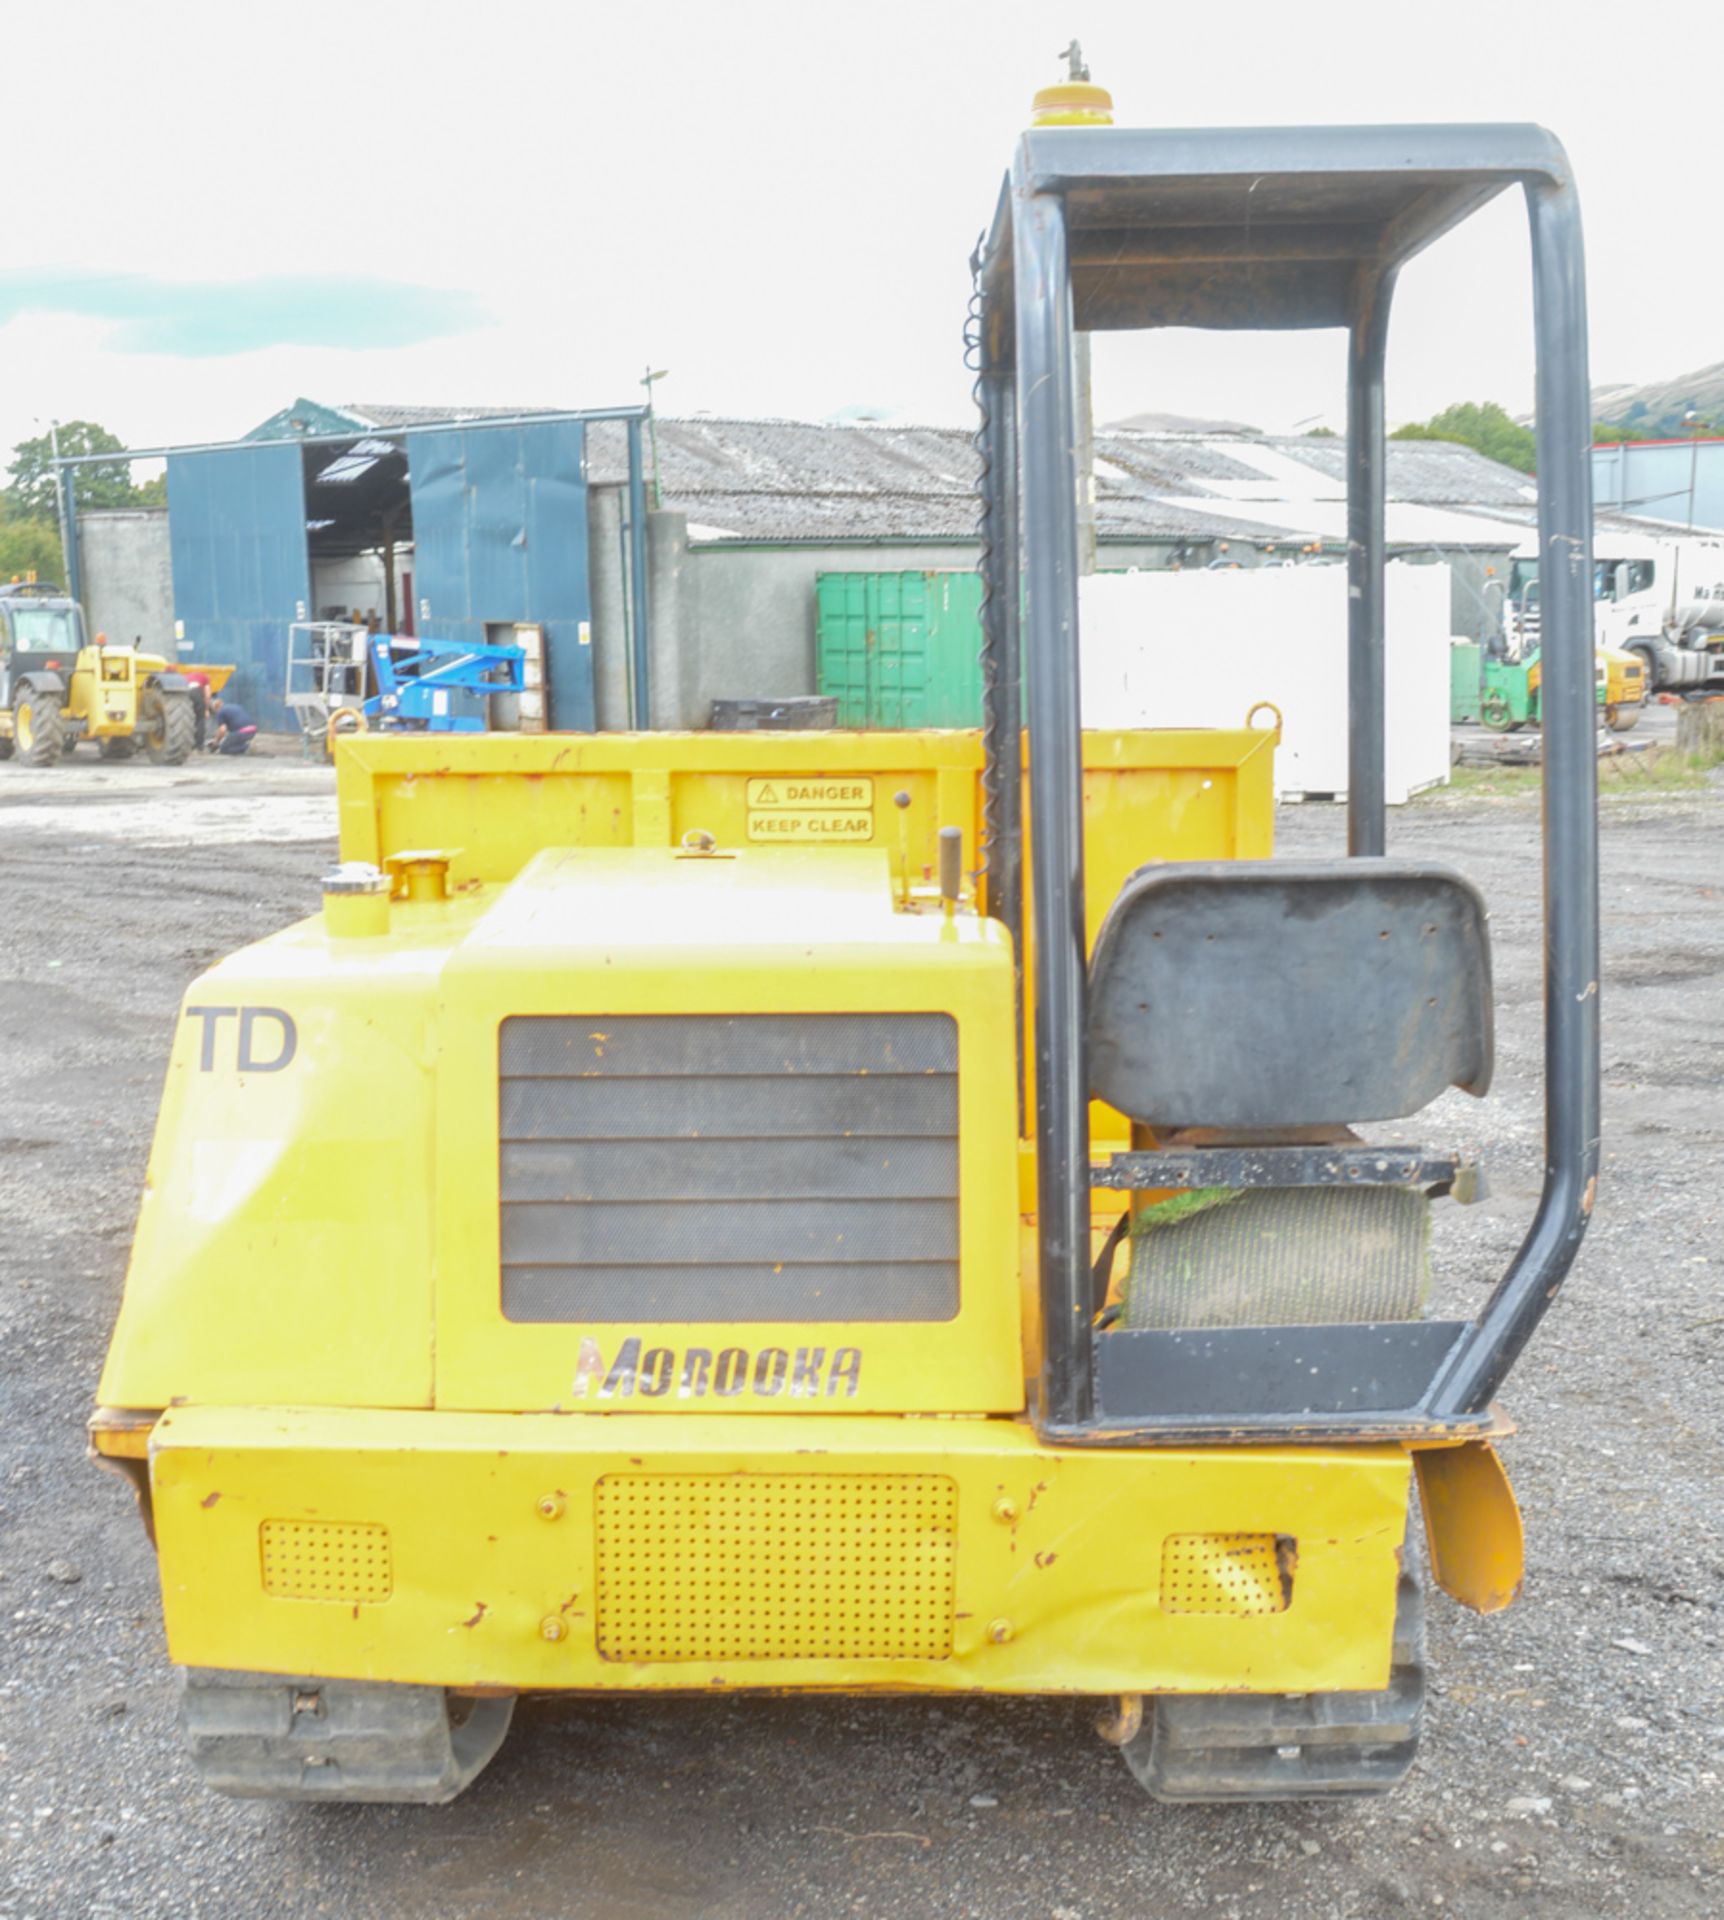 Morooka MST 300-VD 2.5 tonne rubber tracked dumper  Year: 2002 S/N: 3481 Recorded hours: 1103 - Image 6 of 9